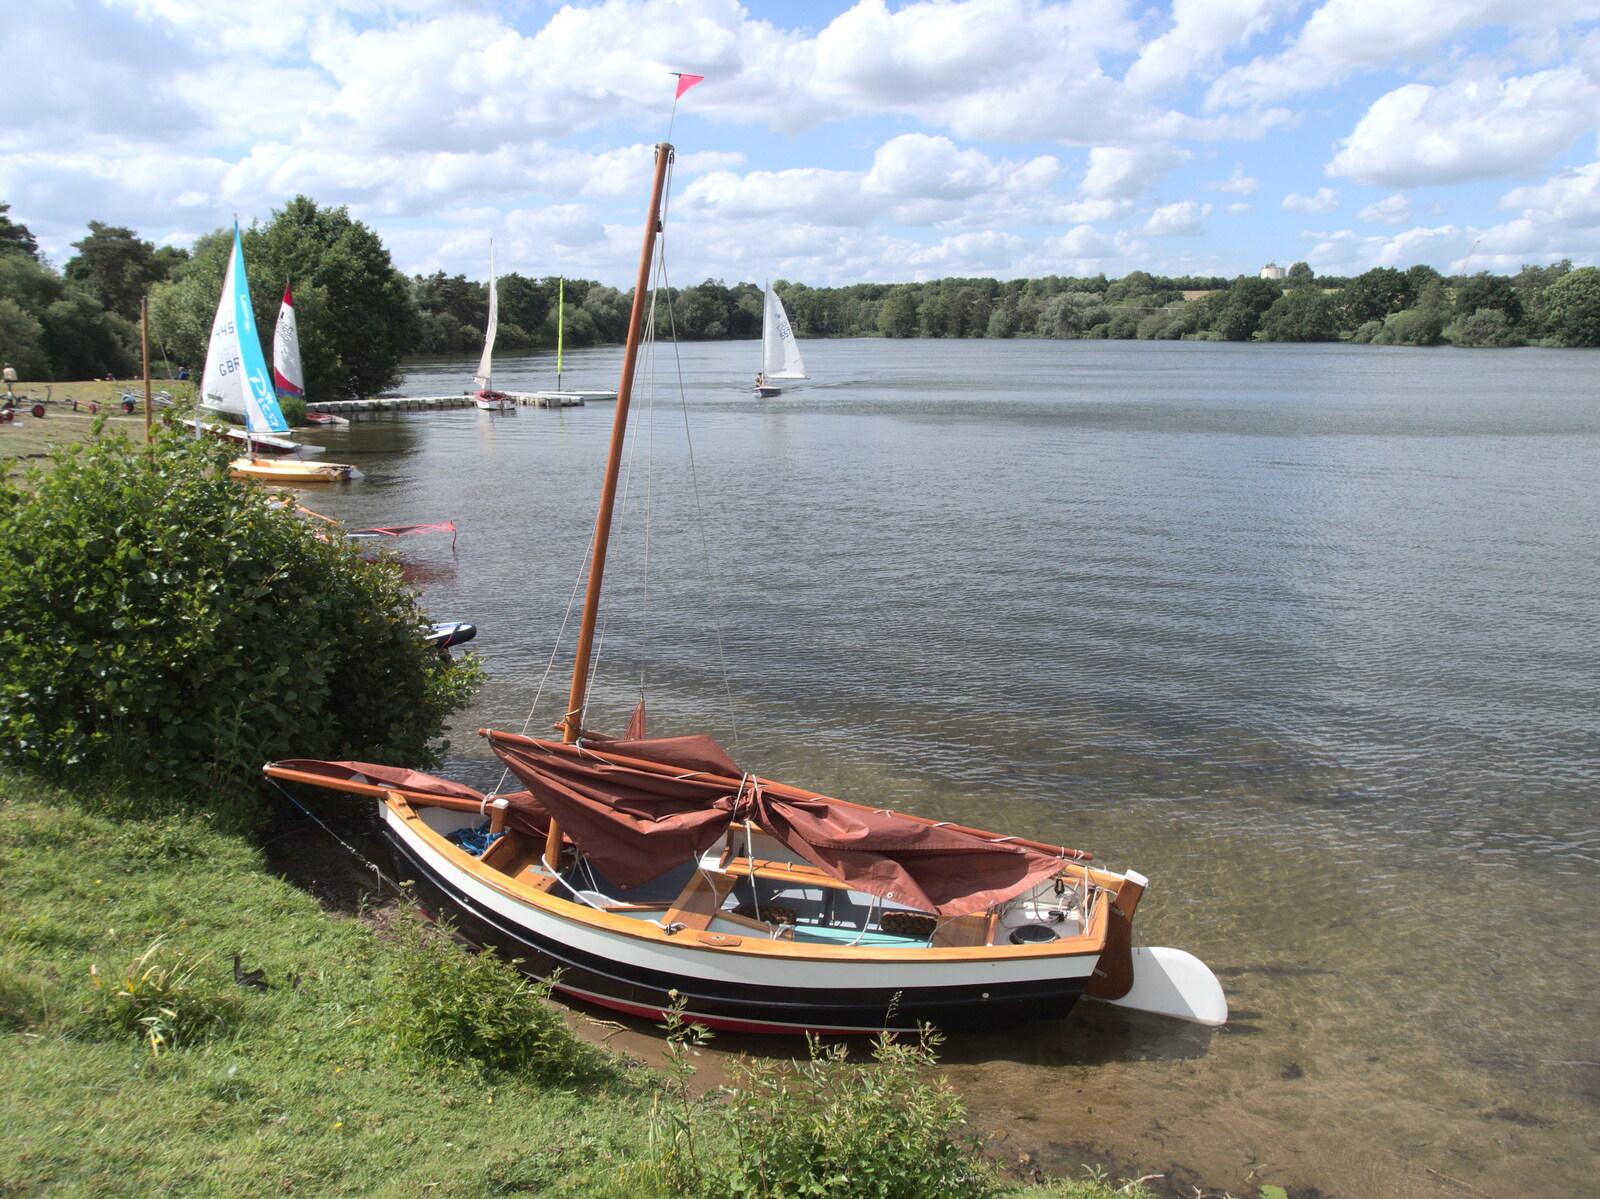 A Day at the Lake, Weybread Pits, Harleston, Norfolk - 11th June 2022: There's a lovely Gunter-rig wooden dinghie moored up